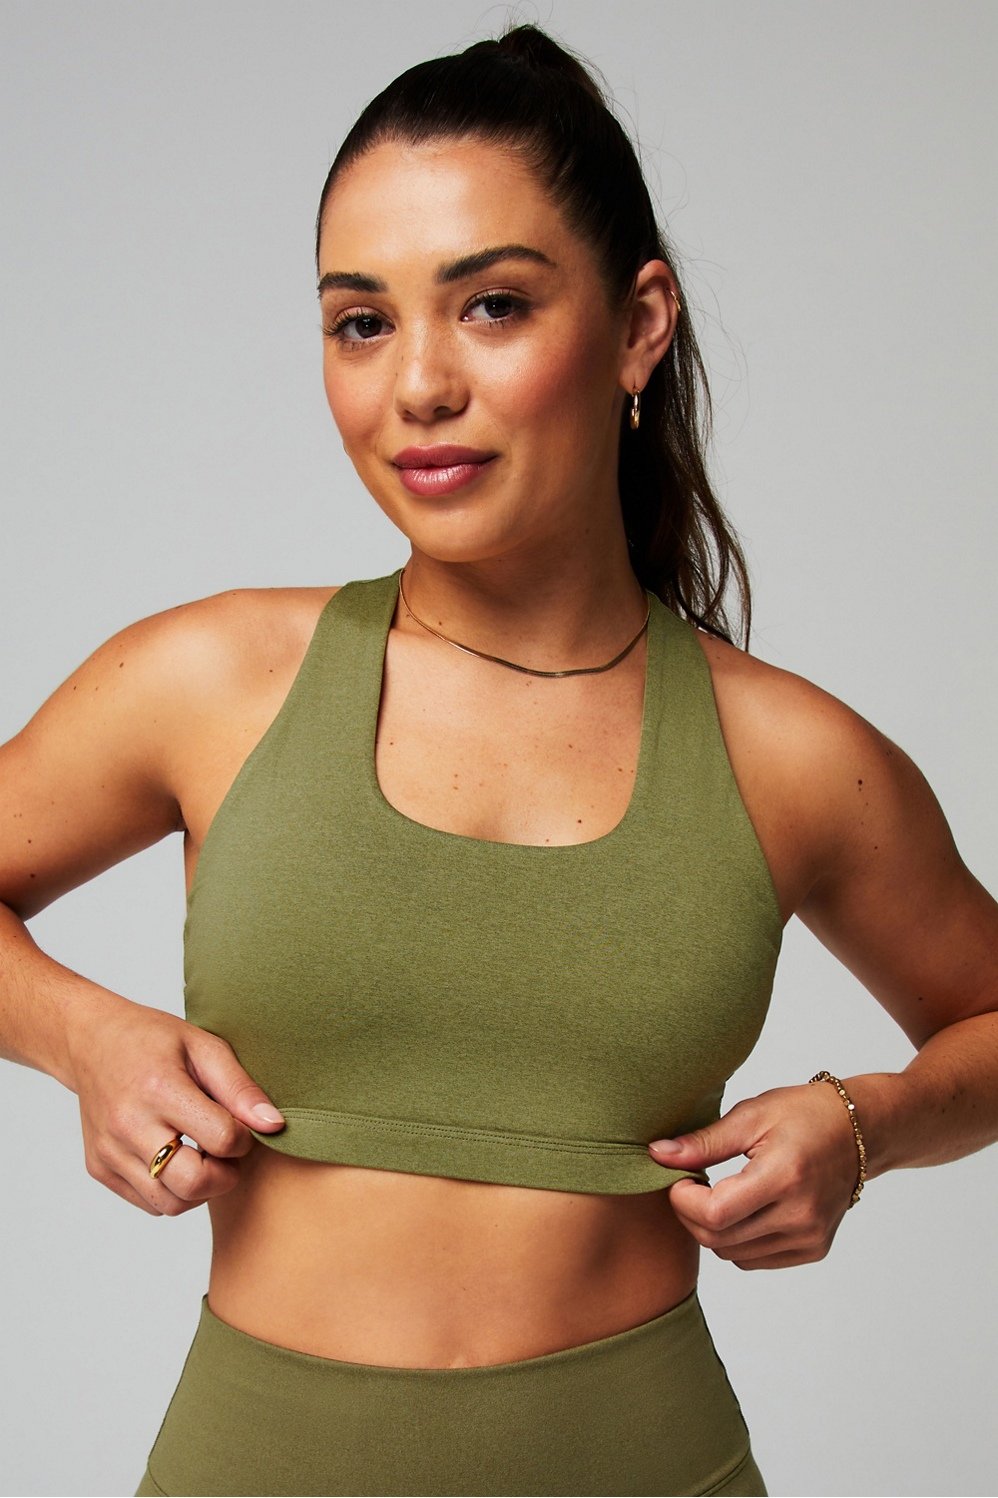 Fabletics Aza Medium Impact Sports Bra Size M. “Excellent” Features  Adjustable Removable cups Fabric & Care 81% Nylon/19% Elastane Imported  Black - $30 - From BZ